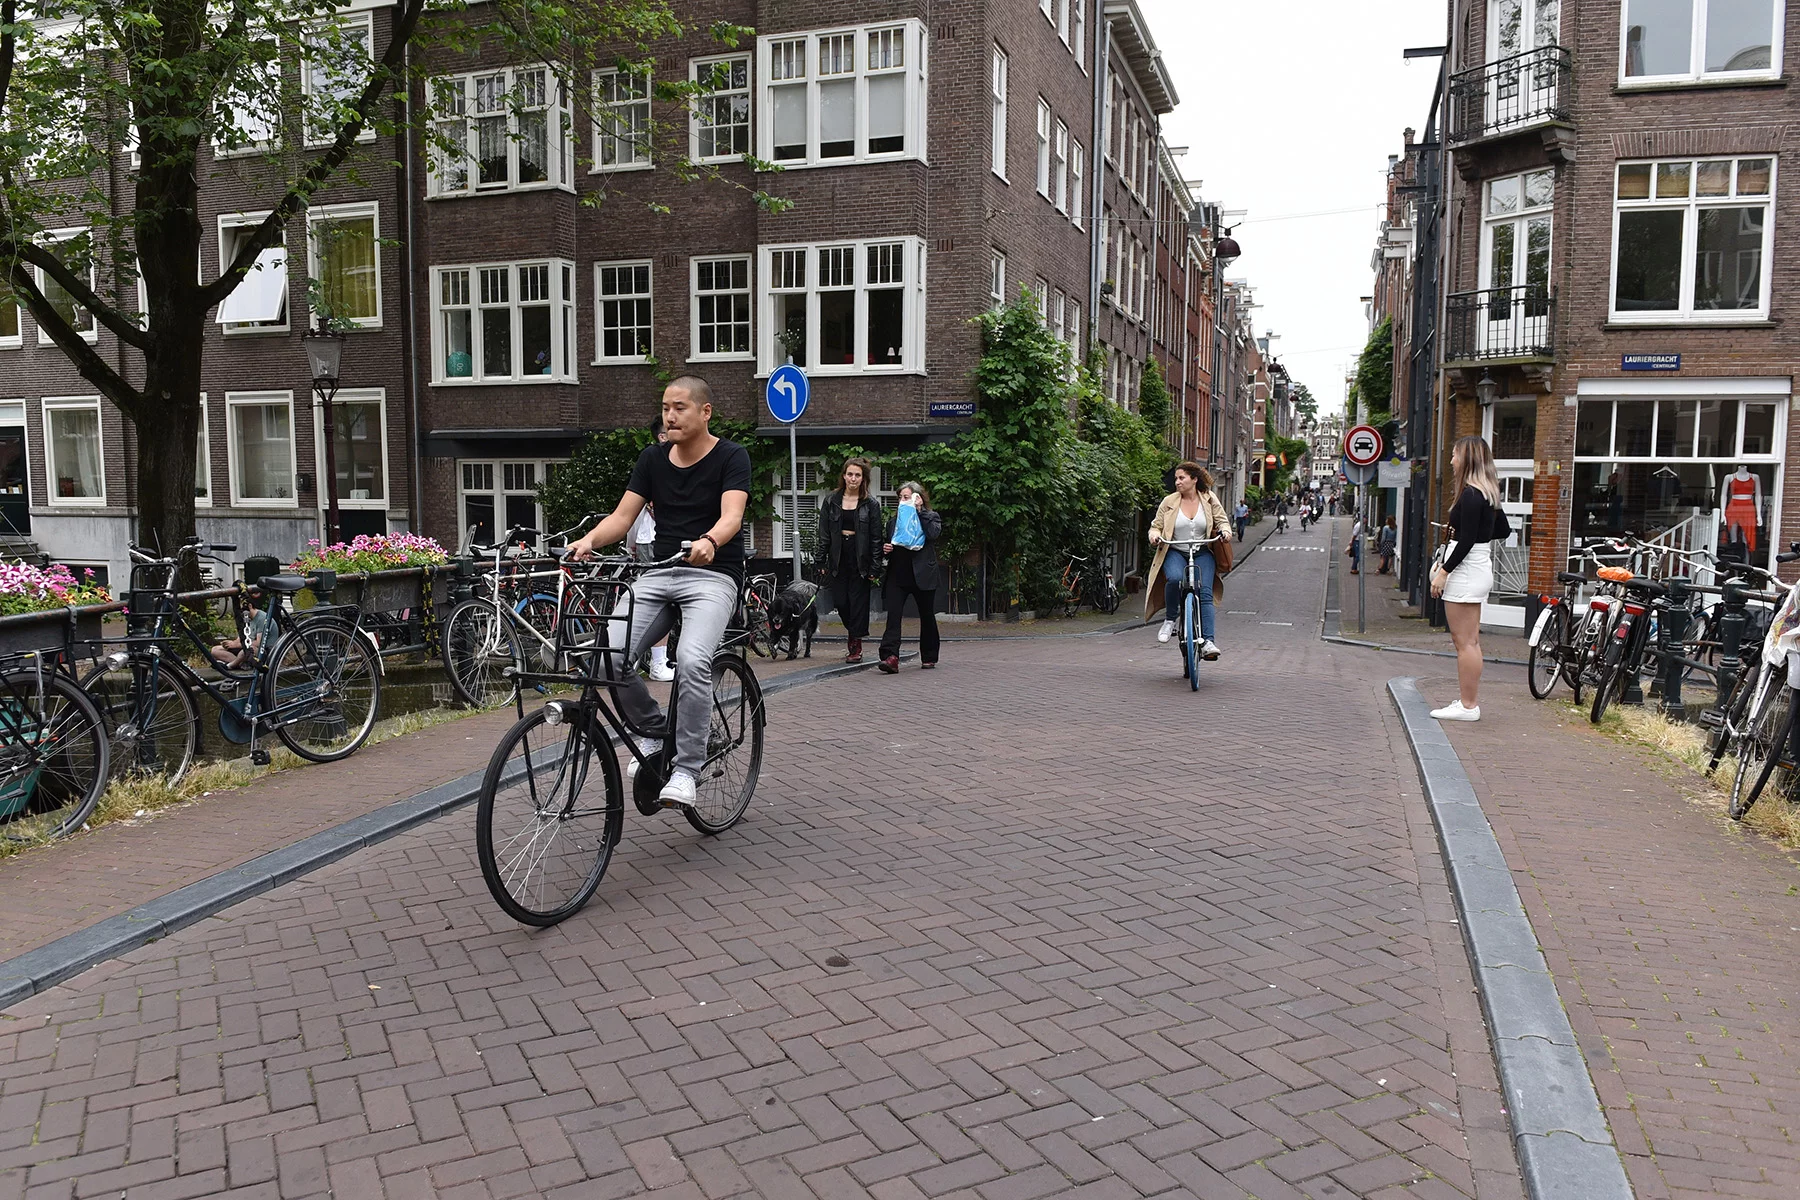 Cyclists on a street in Amsterdam